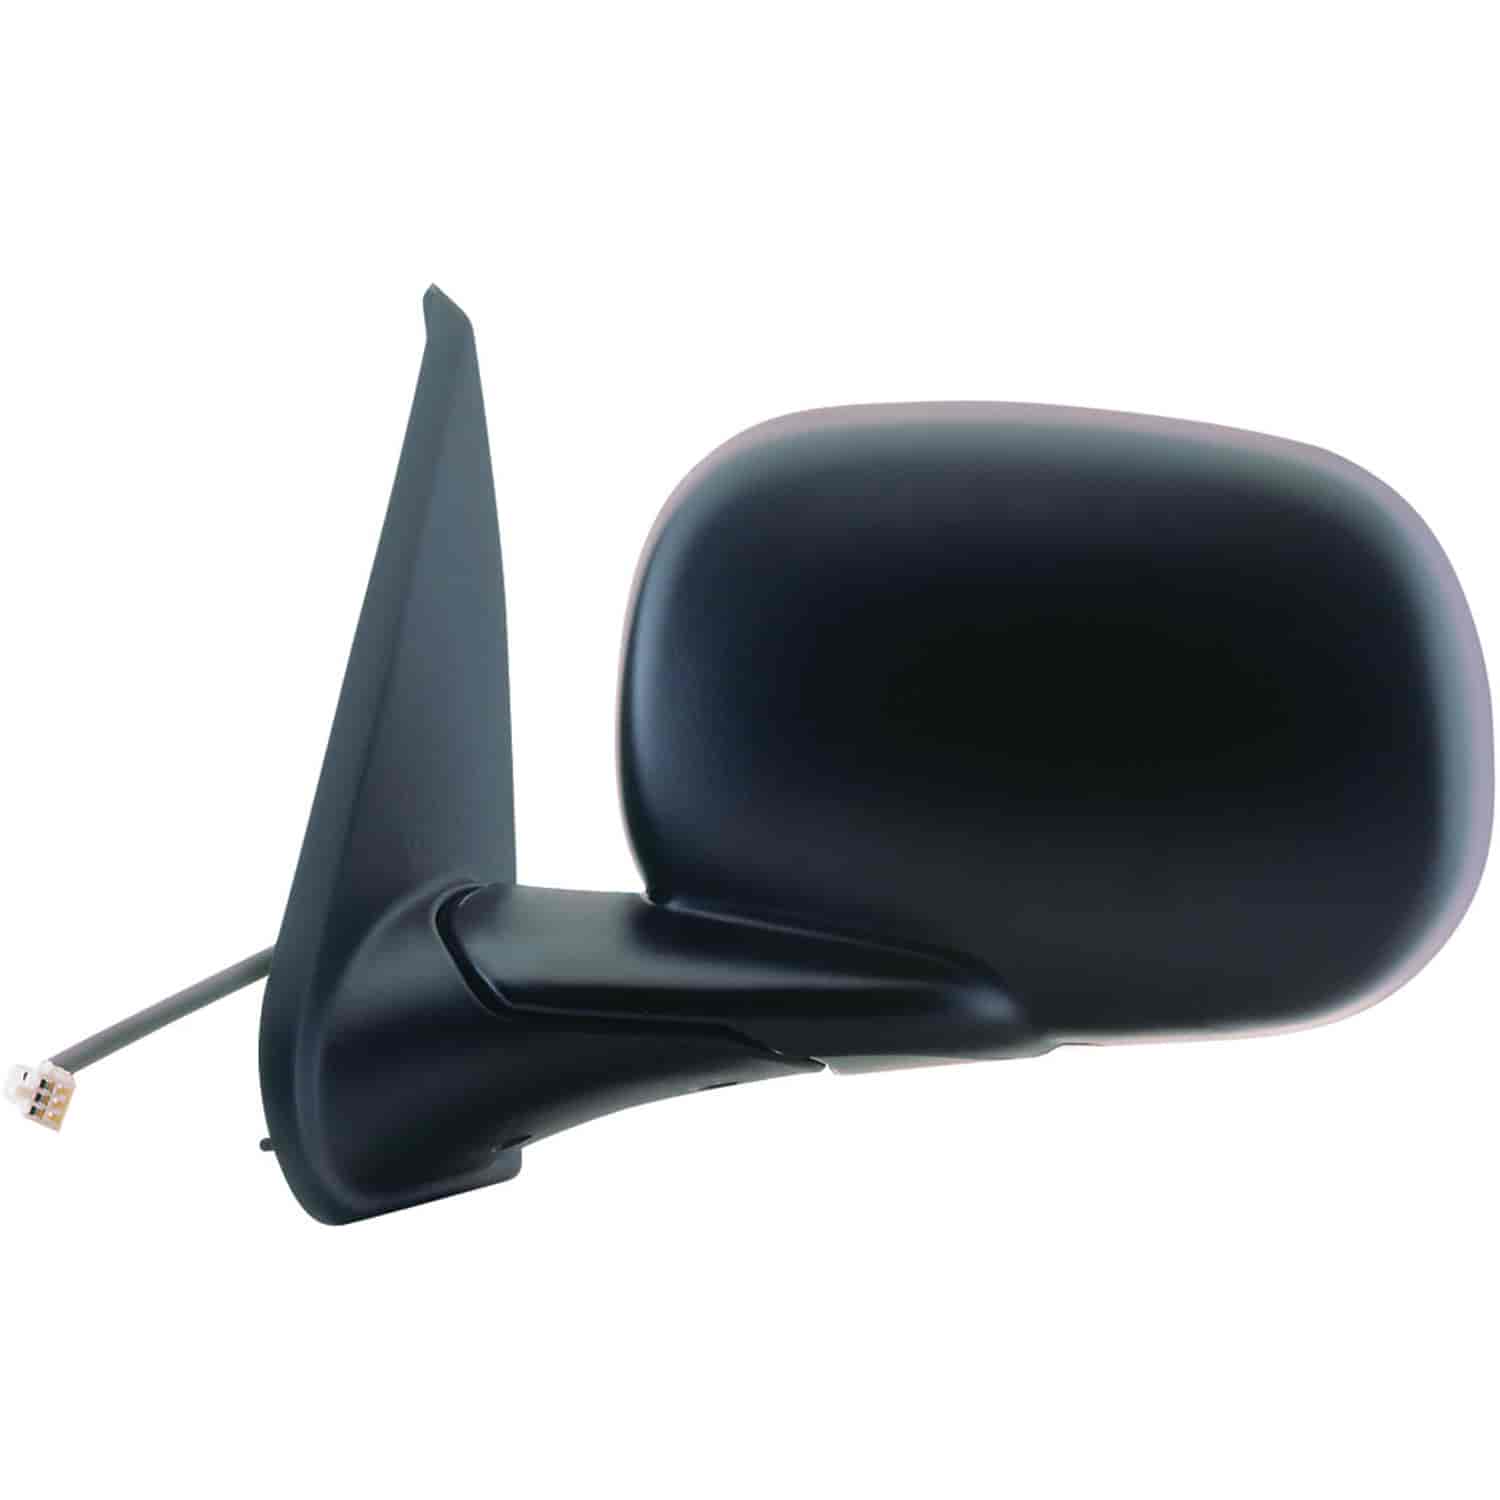 OEM Style Replacement mirror for 98-01 Dodge Full Size Van driver side mirror tested to fit and func